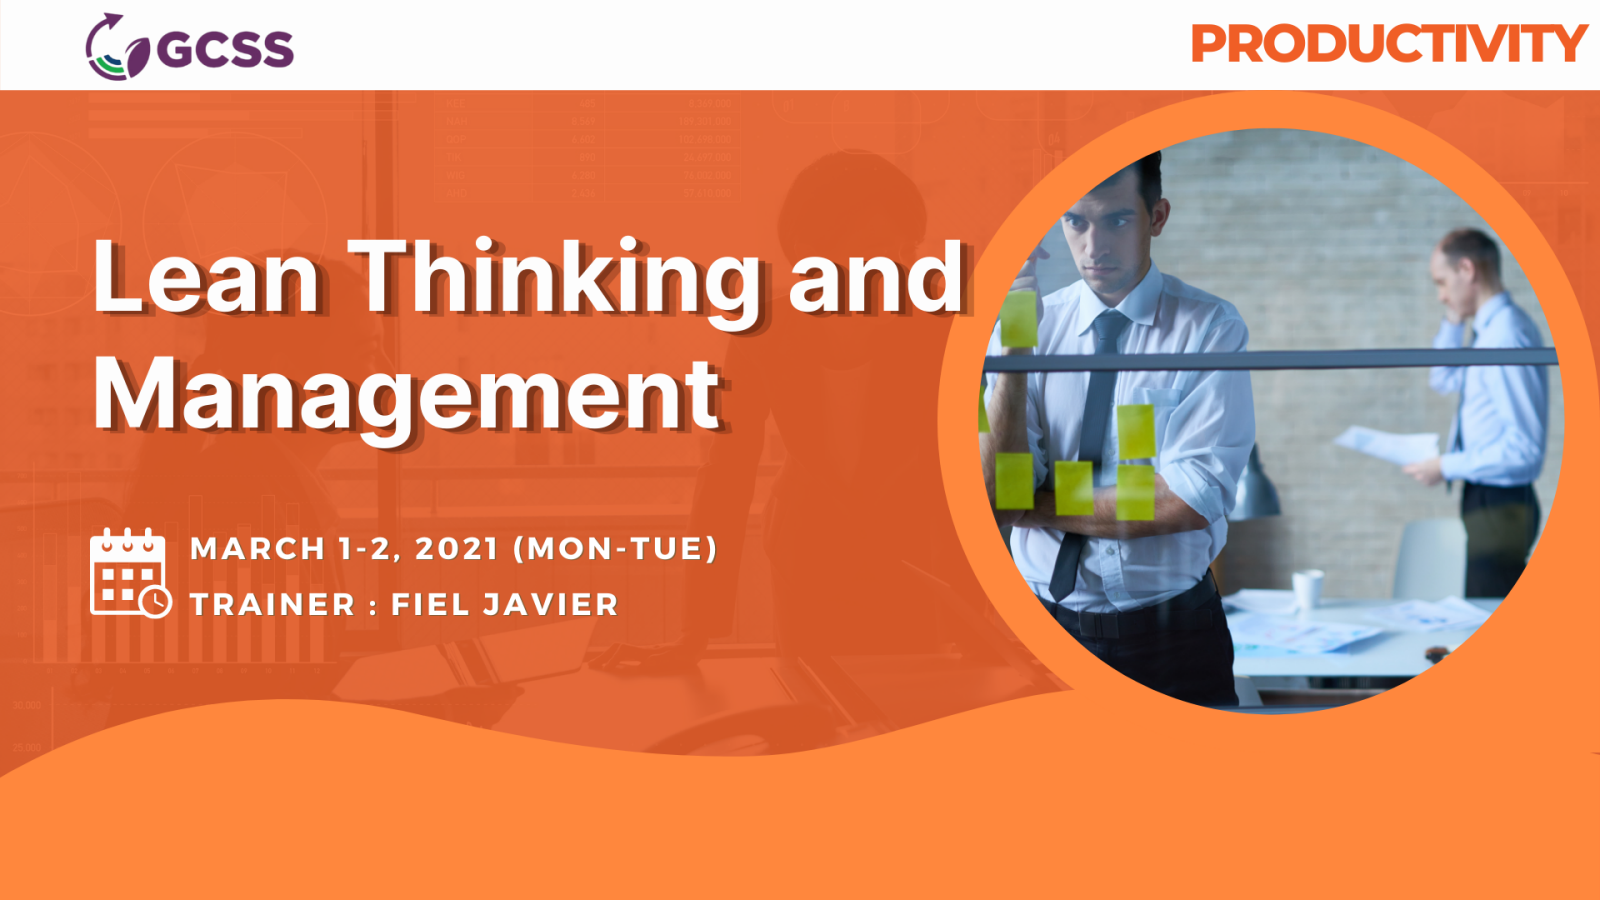 Lean Thinking and Management, March 1-2, 2021, Manila, National Capital Region, Philippines